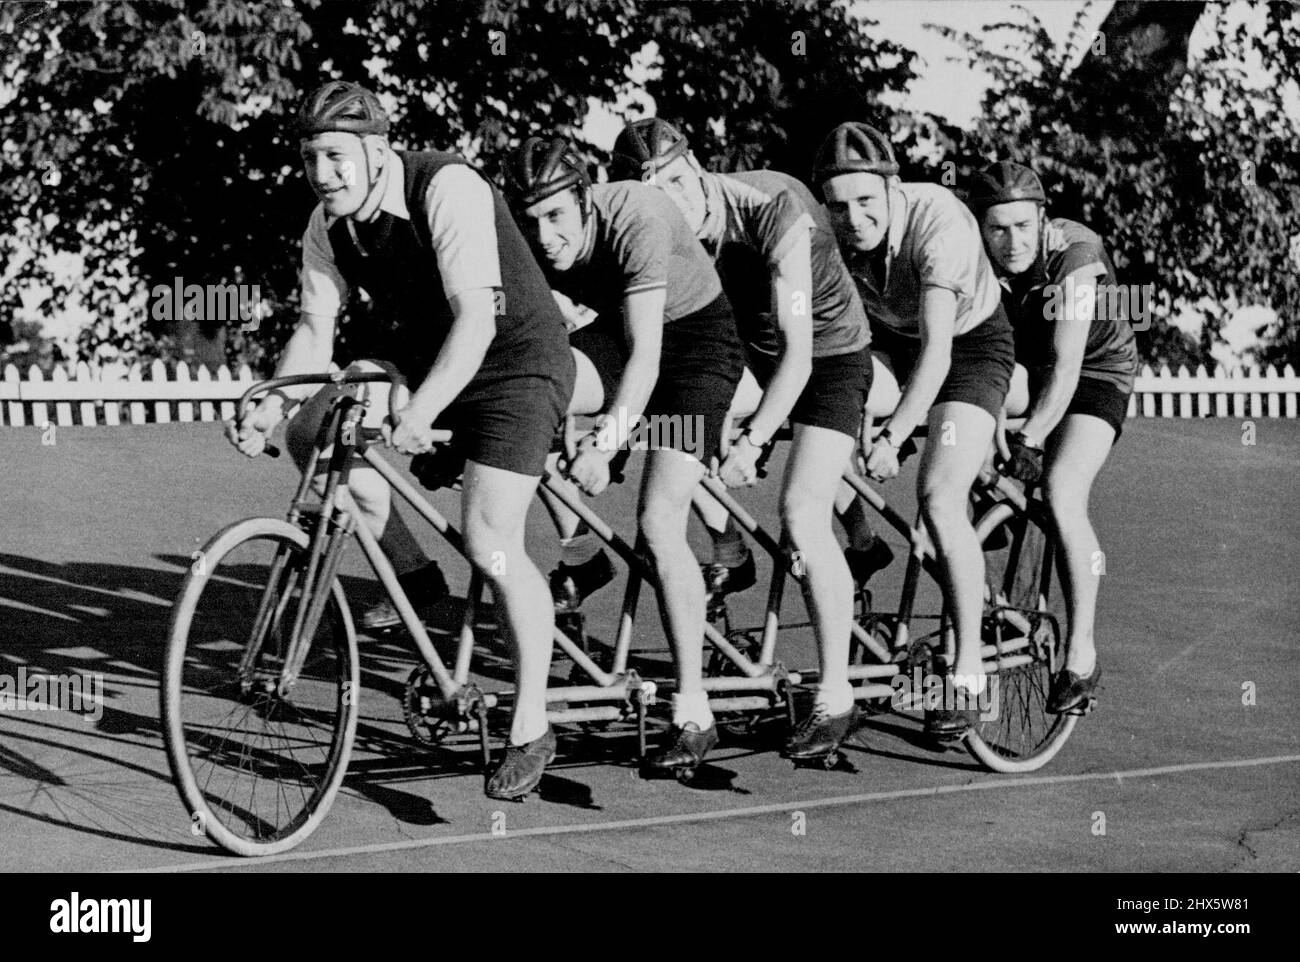 The 'Quint' Out For An Airing -- Trying out the 'Quint' at the Herne Hill track London. The 'Quint' or five seater cycle was actually built about 50 years ago but remained almost unused. It will be utised for incing purposes and demonstrations. August 6, 1949. (Photo by Sports And General Press Agency Limited). sports, sport, athlete, athletic, Stock Photo